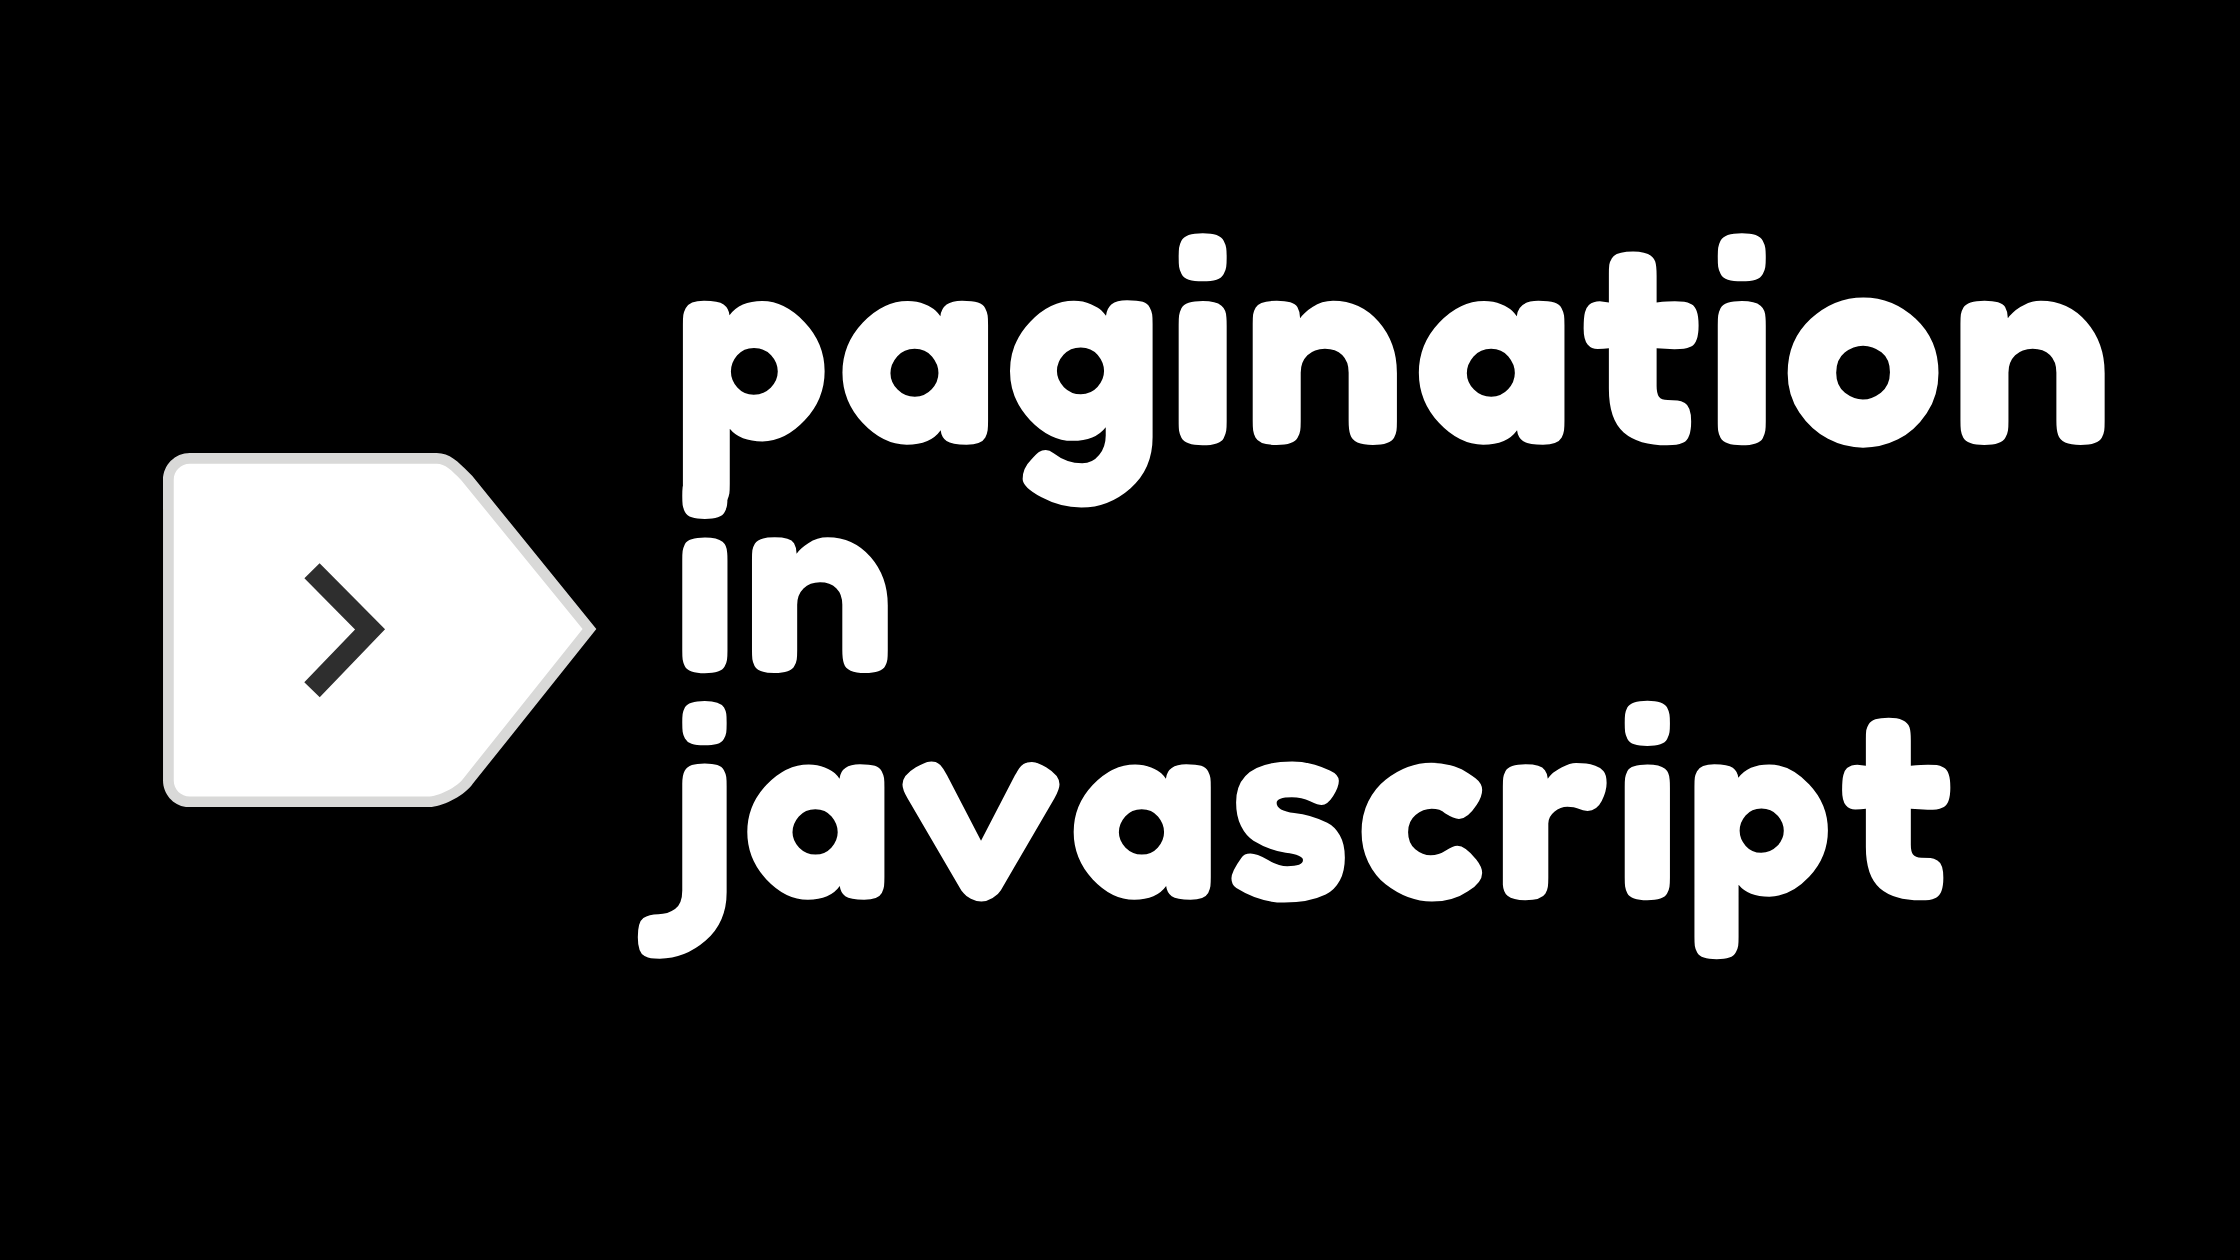 How To Paginate Through A Collection In JavaScript